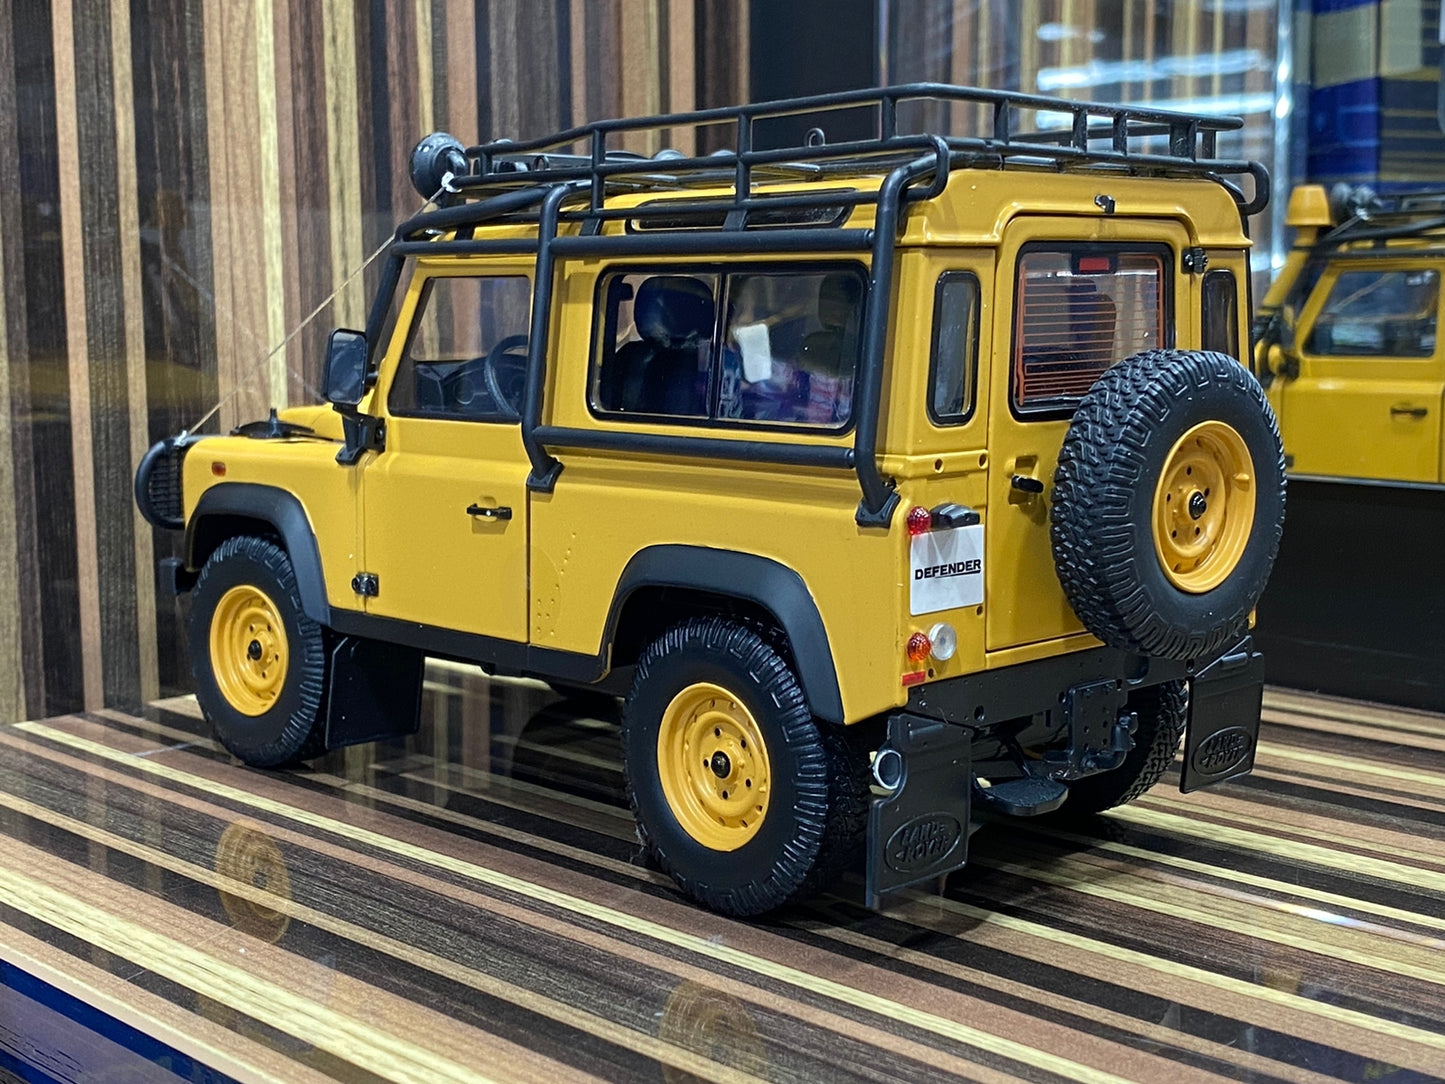 Land Rover Defender 90 Adventure 2007 1/18 Diecast car by Kyosho